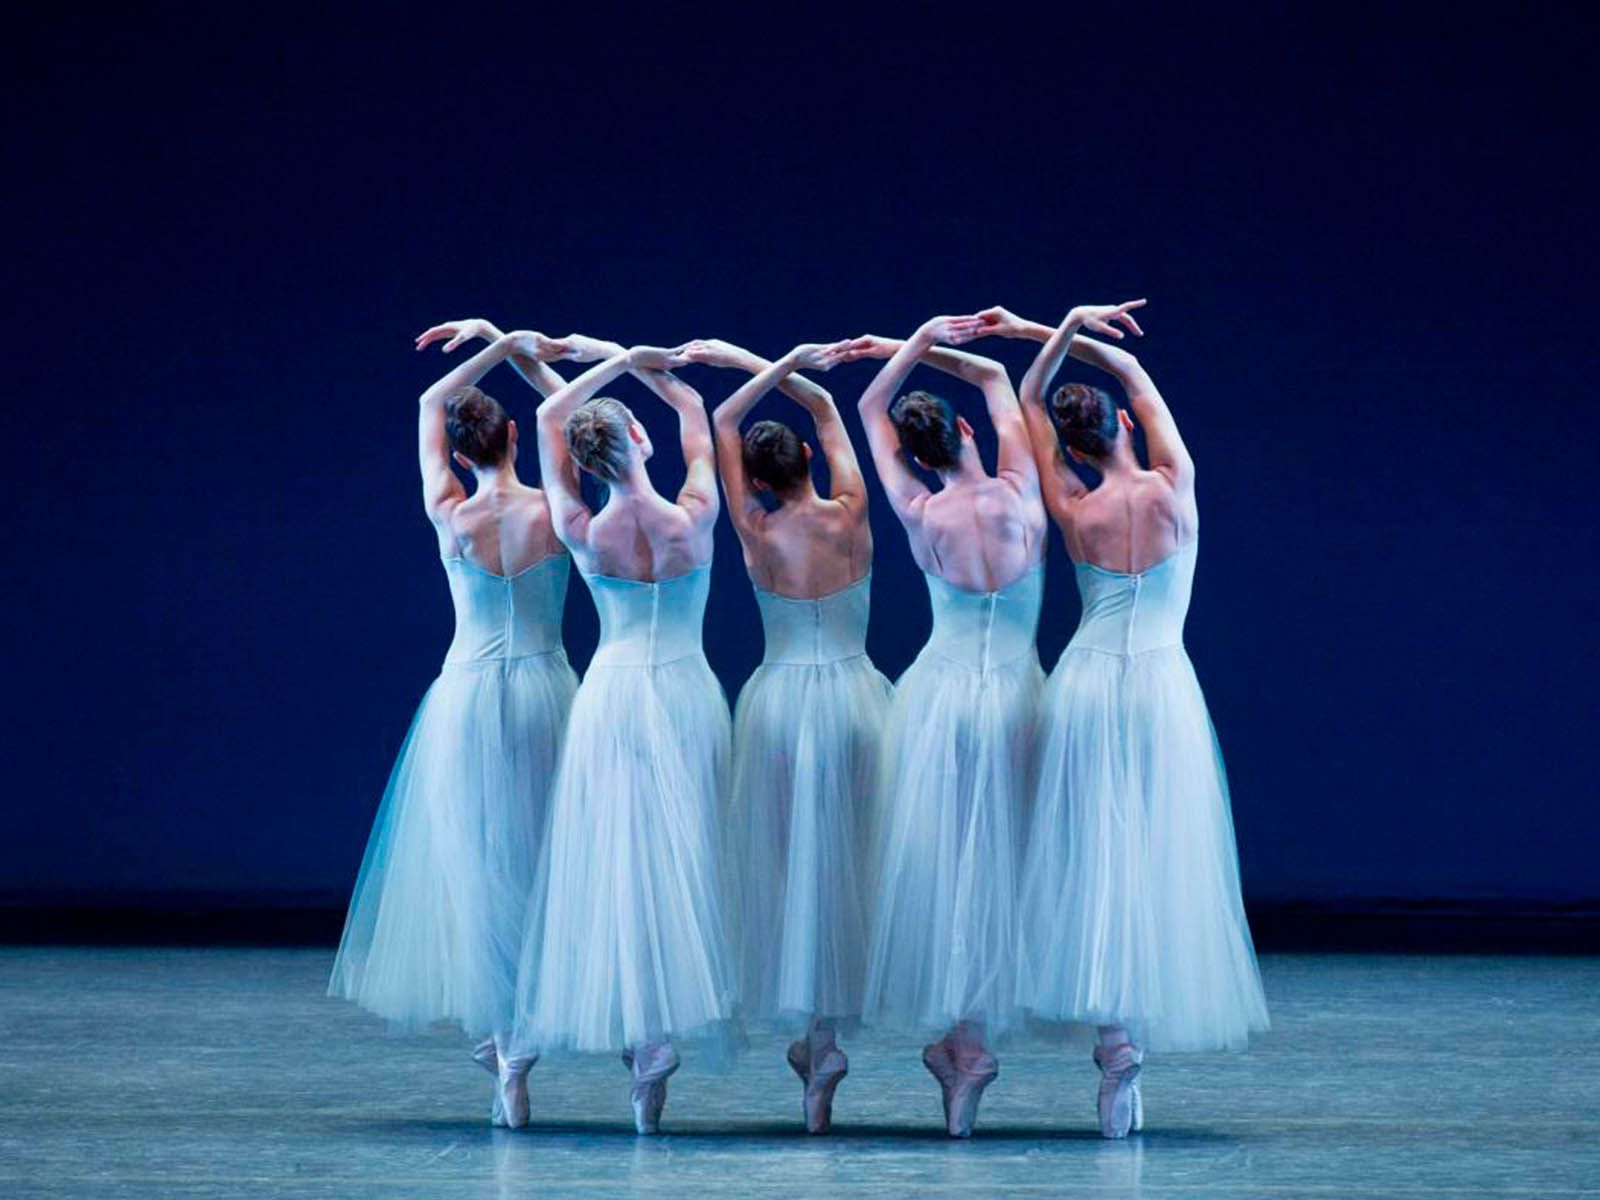 Palomo Spain to design costumes for the New York City Ballet